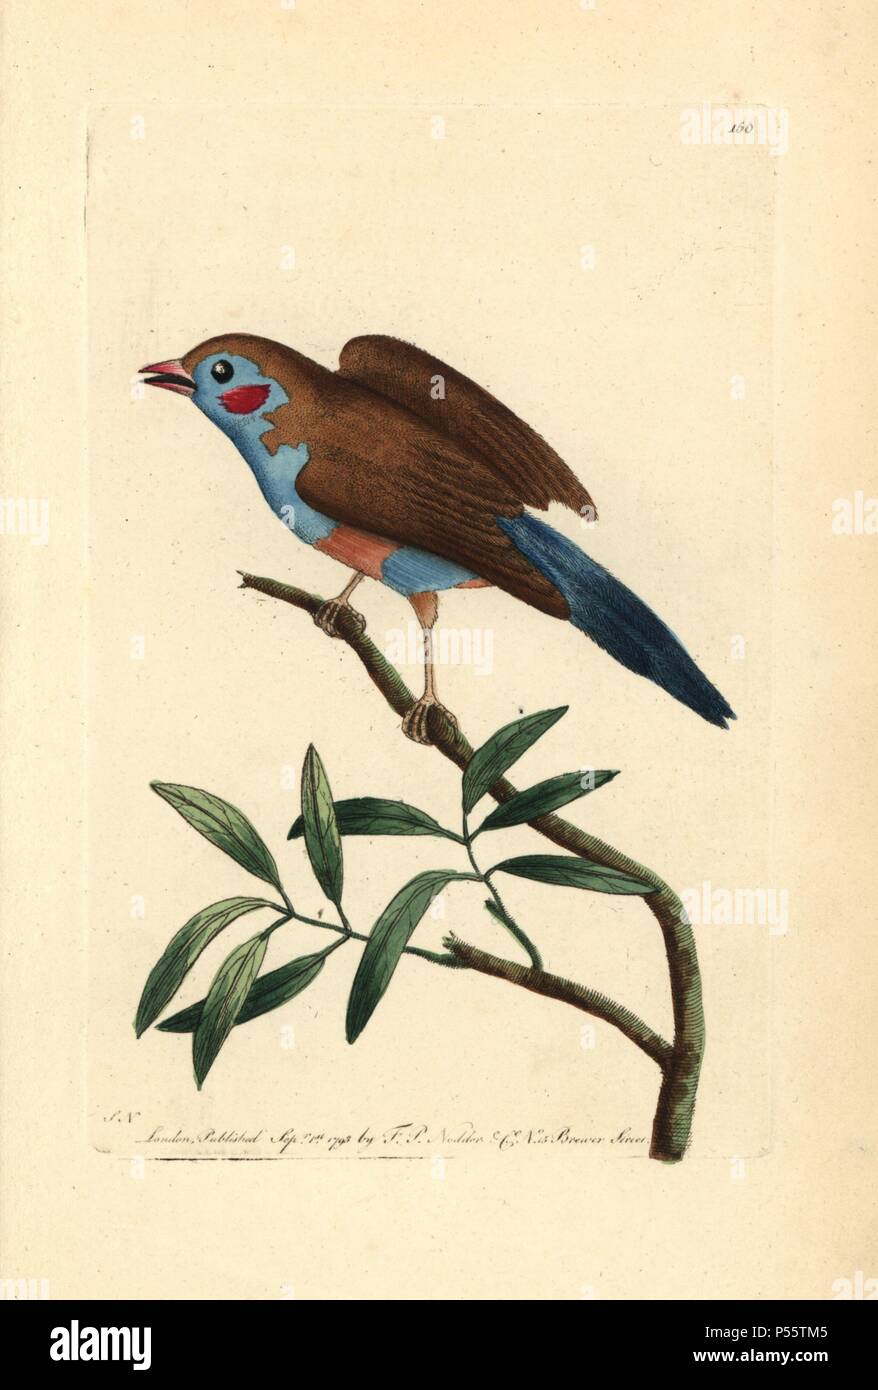 Red-cheeked cordon-blue, Uraeginthus bengalus. Illustration signed SN (George Shaw and Frederick Nodder).. Handcolored copperplate engraving from George Shaw and Frederick Nodder's 'The Naturalist's Miscellany' 1793.. Frederick Polydore Nodder (17511801?) was a gifted natural history artist and engraver. Nodder honed his draftsmanship working on Captain Cook and Joseph Banks' Florilegium and engraving Sydney Parkinson's sketches of Australian plants. He was made 'botanic painter to her majesty' Queen Charlotte in 1785. Nodder also drew the botanical studies in Thomas Martyn's Flora Rustica (1 Stock Photo